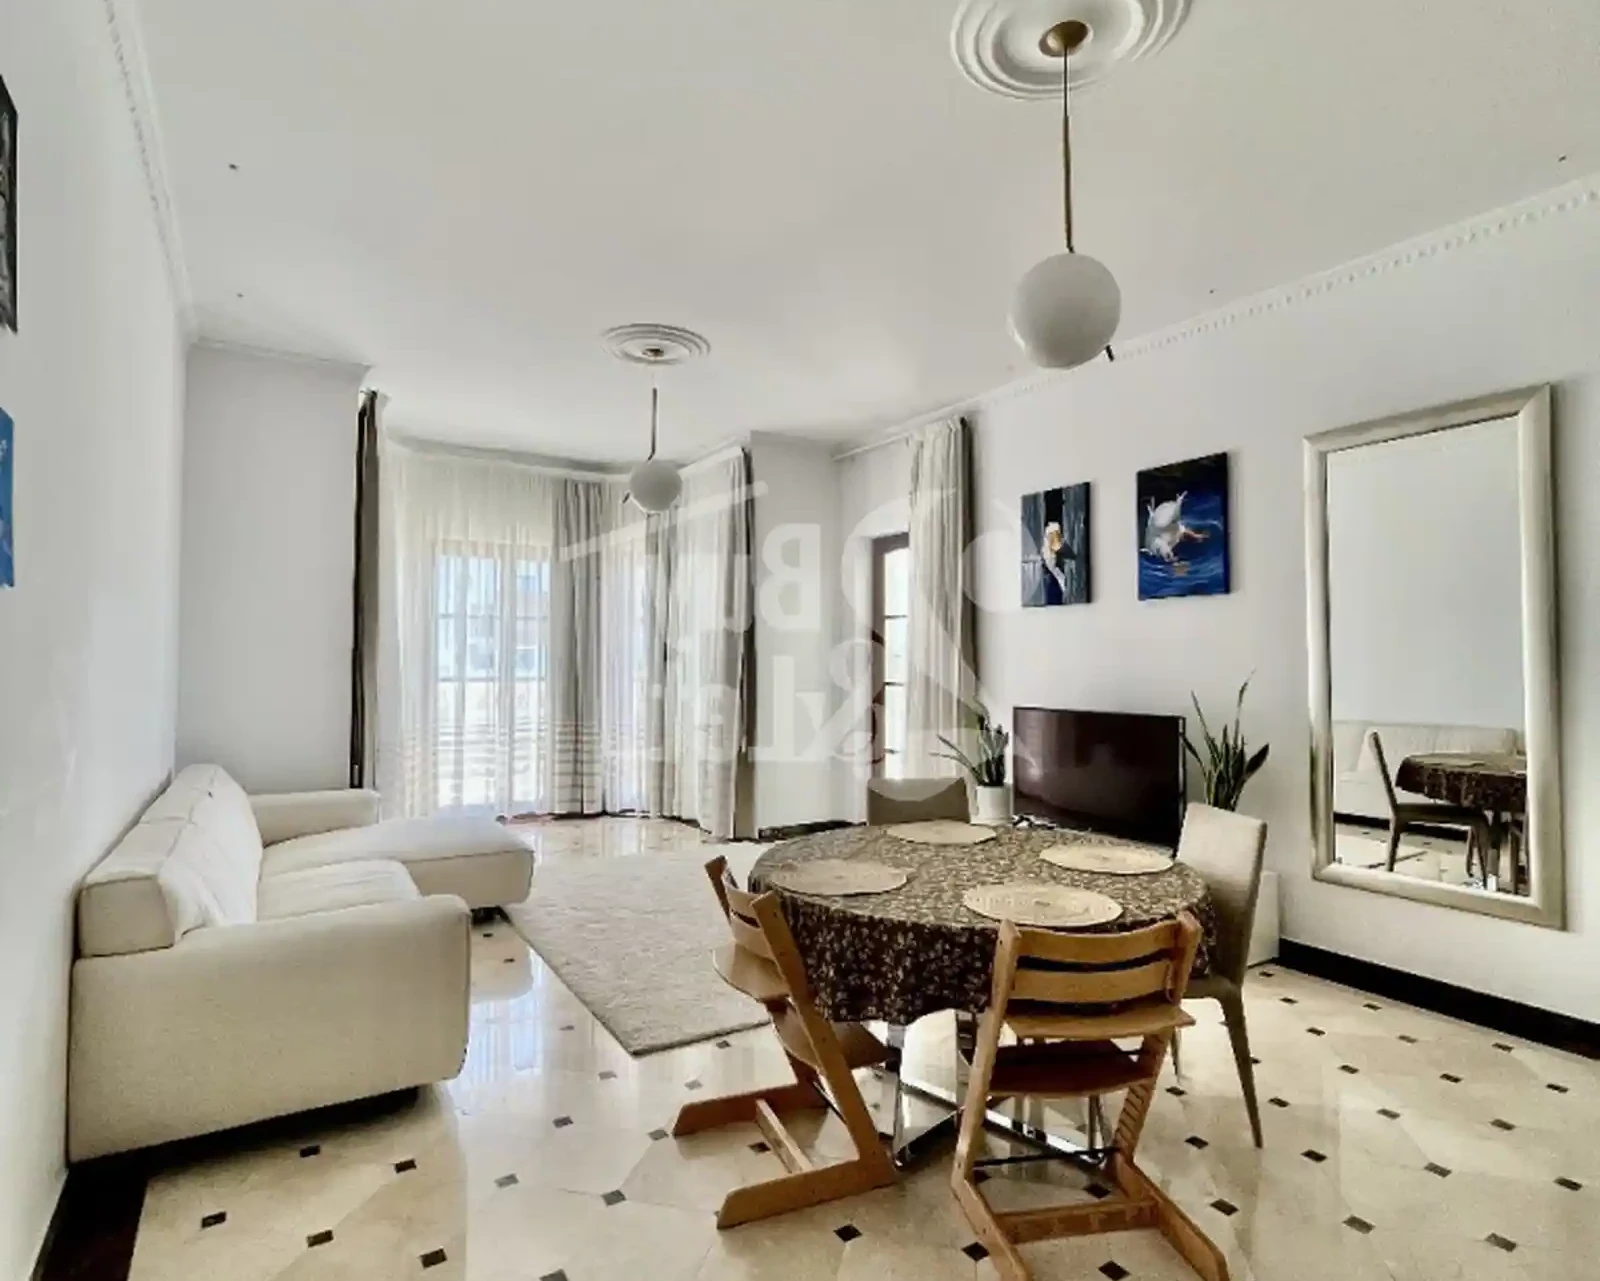 3-bedroom apartment fоr sаle €1.300.000, image 1